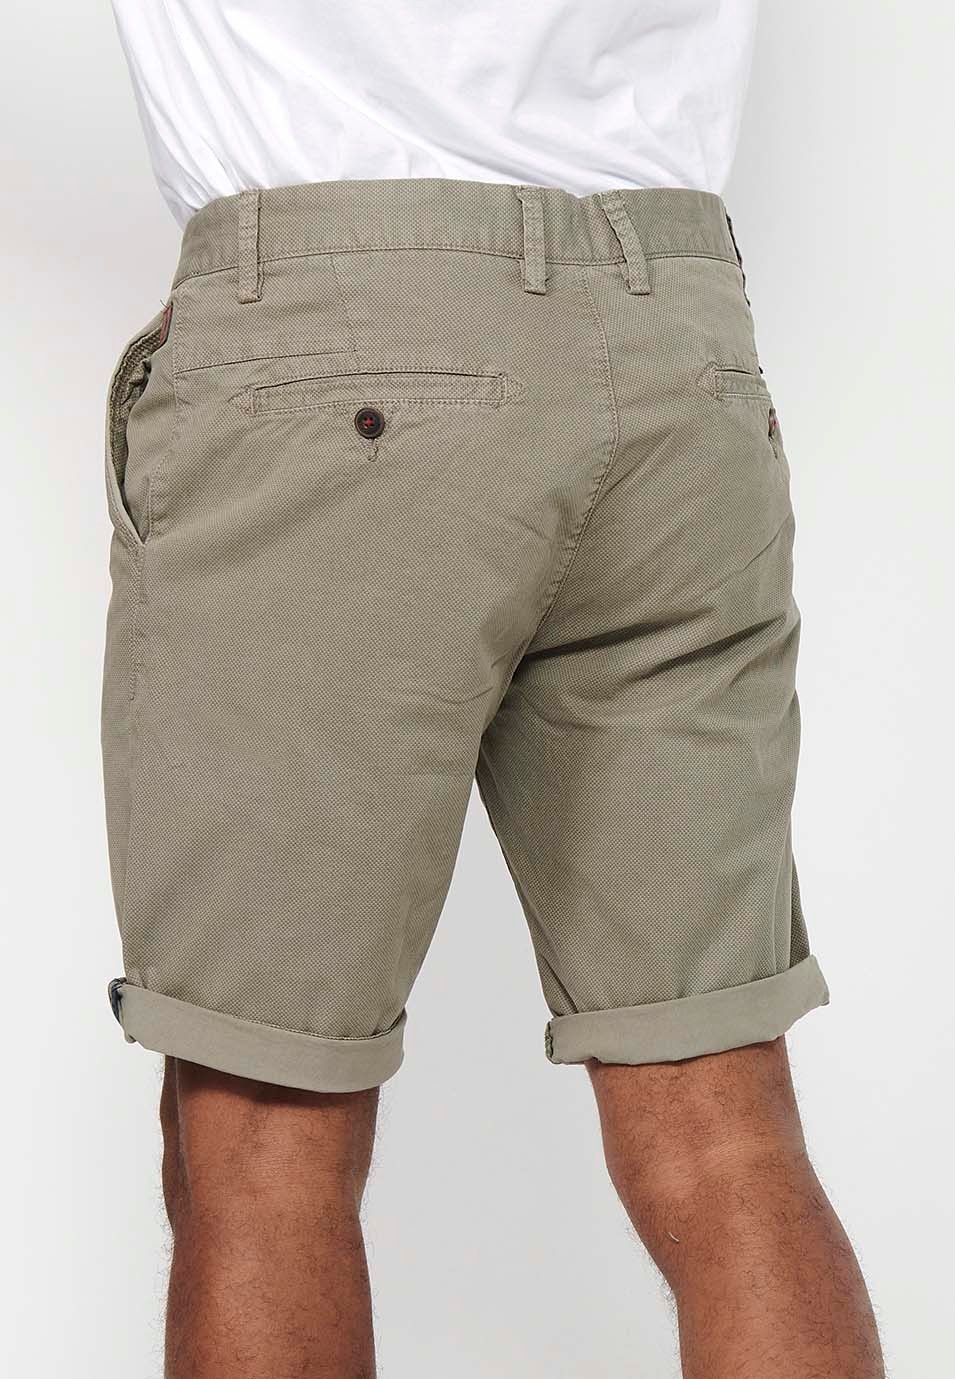 Men's Bermuda Chino Shorts with Turn-Up Finish with Front Zipper and Button Closure with Four Pockets in Mink Color 9